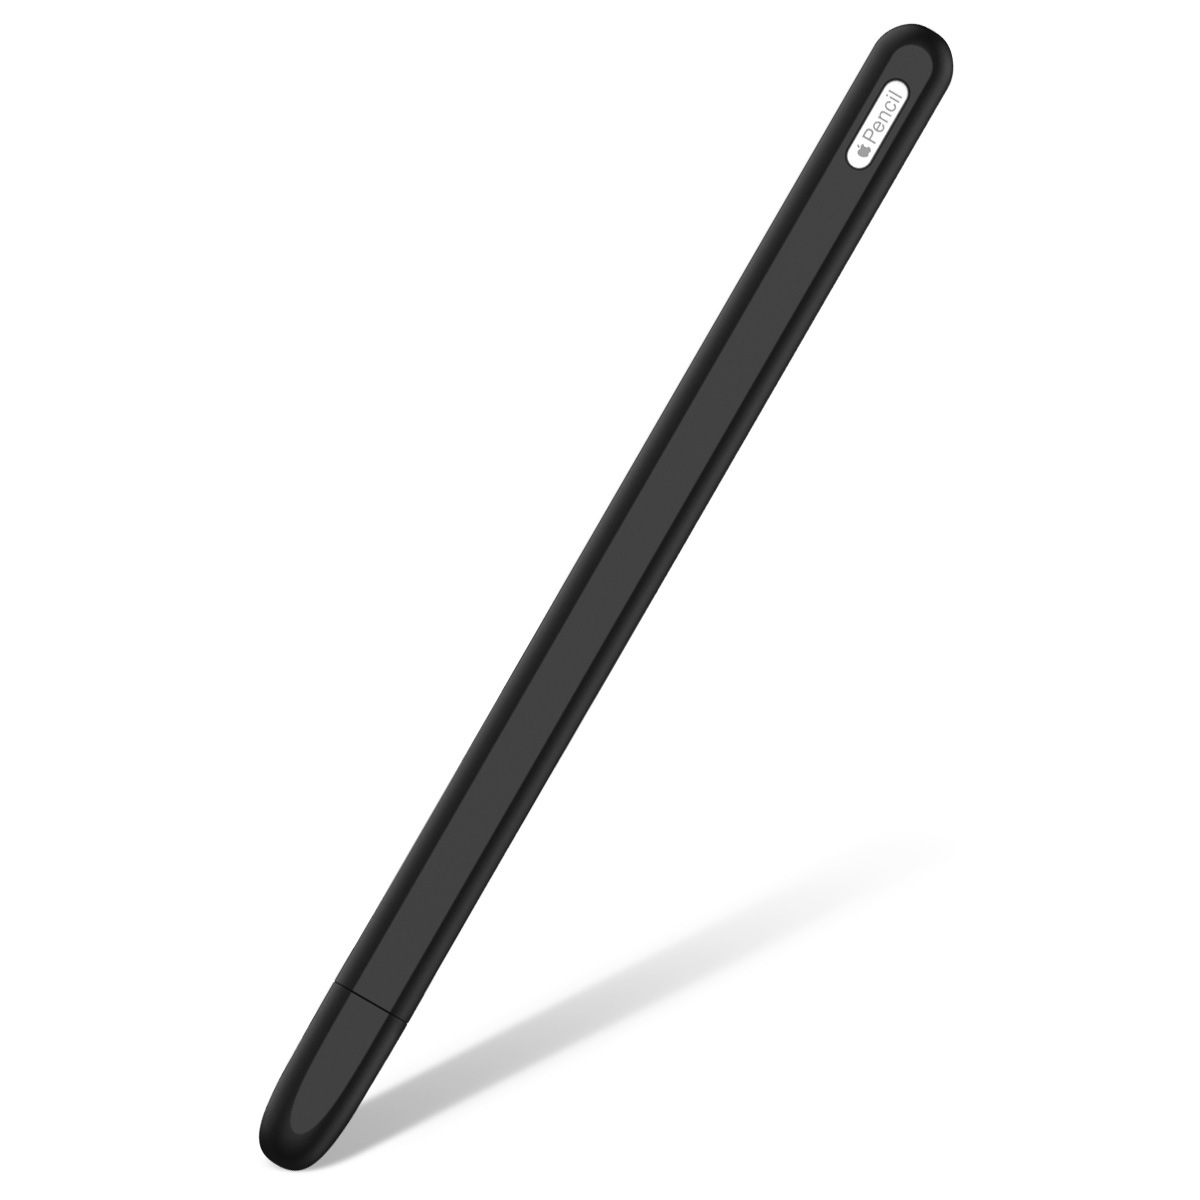 Bakeey-Anti-slip-Anti-fall-Silicone-Touch-Screen-Stylus-Pen-Protective-Case-for-Apple-Pencil-2nd-Gen-1593573-12